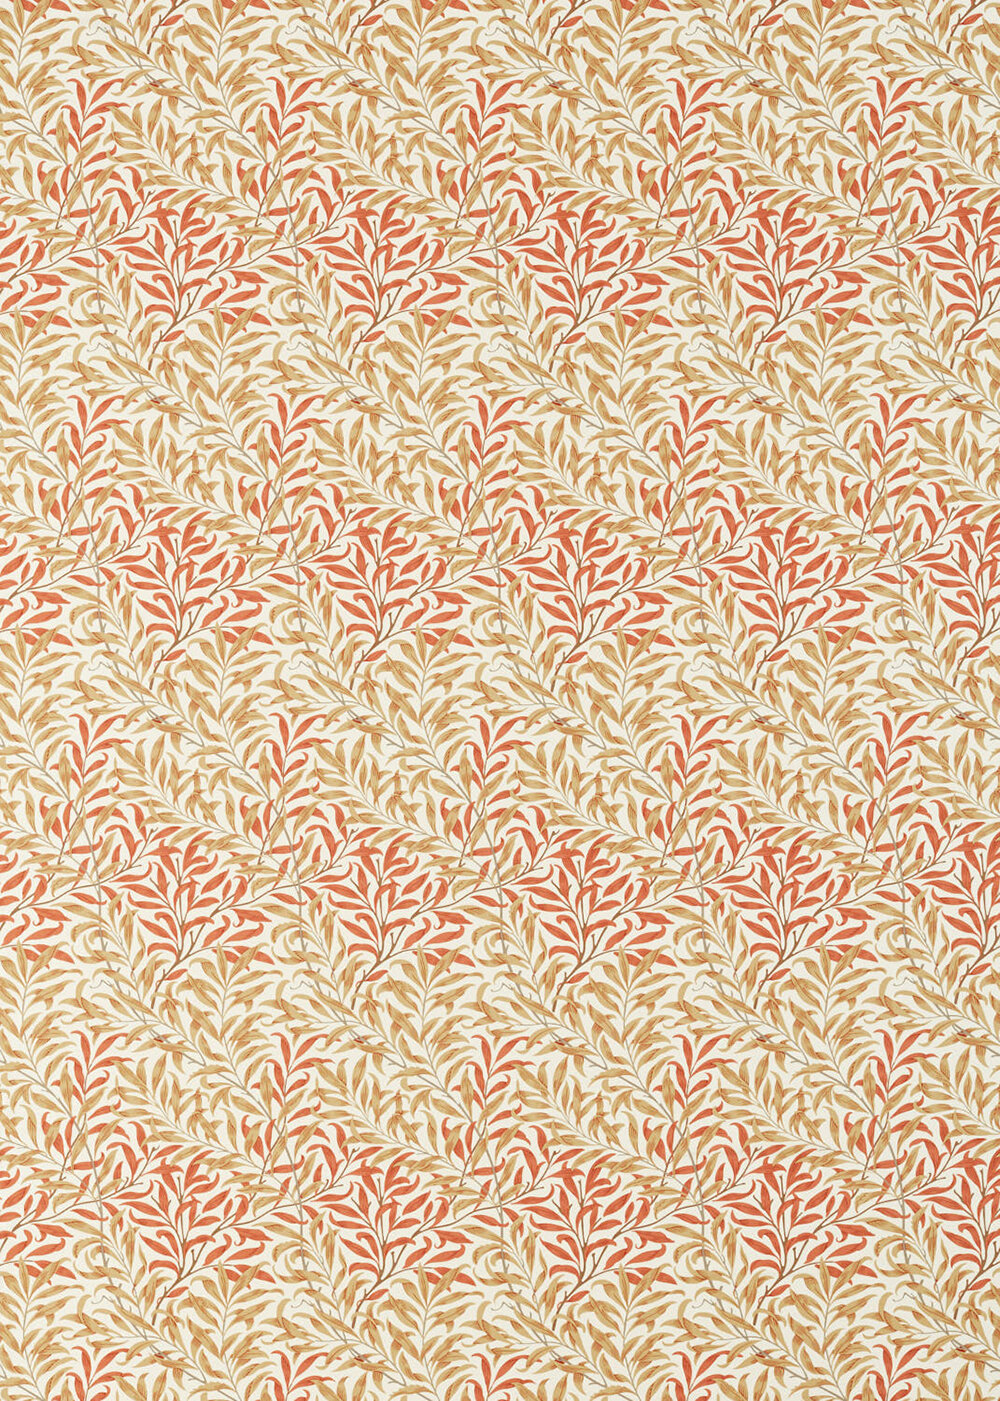 Willow Bough  Fabric - Russet/ Ochre - by Morris